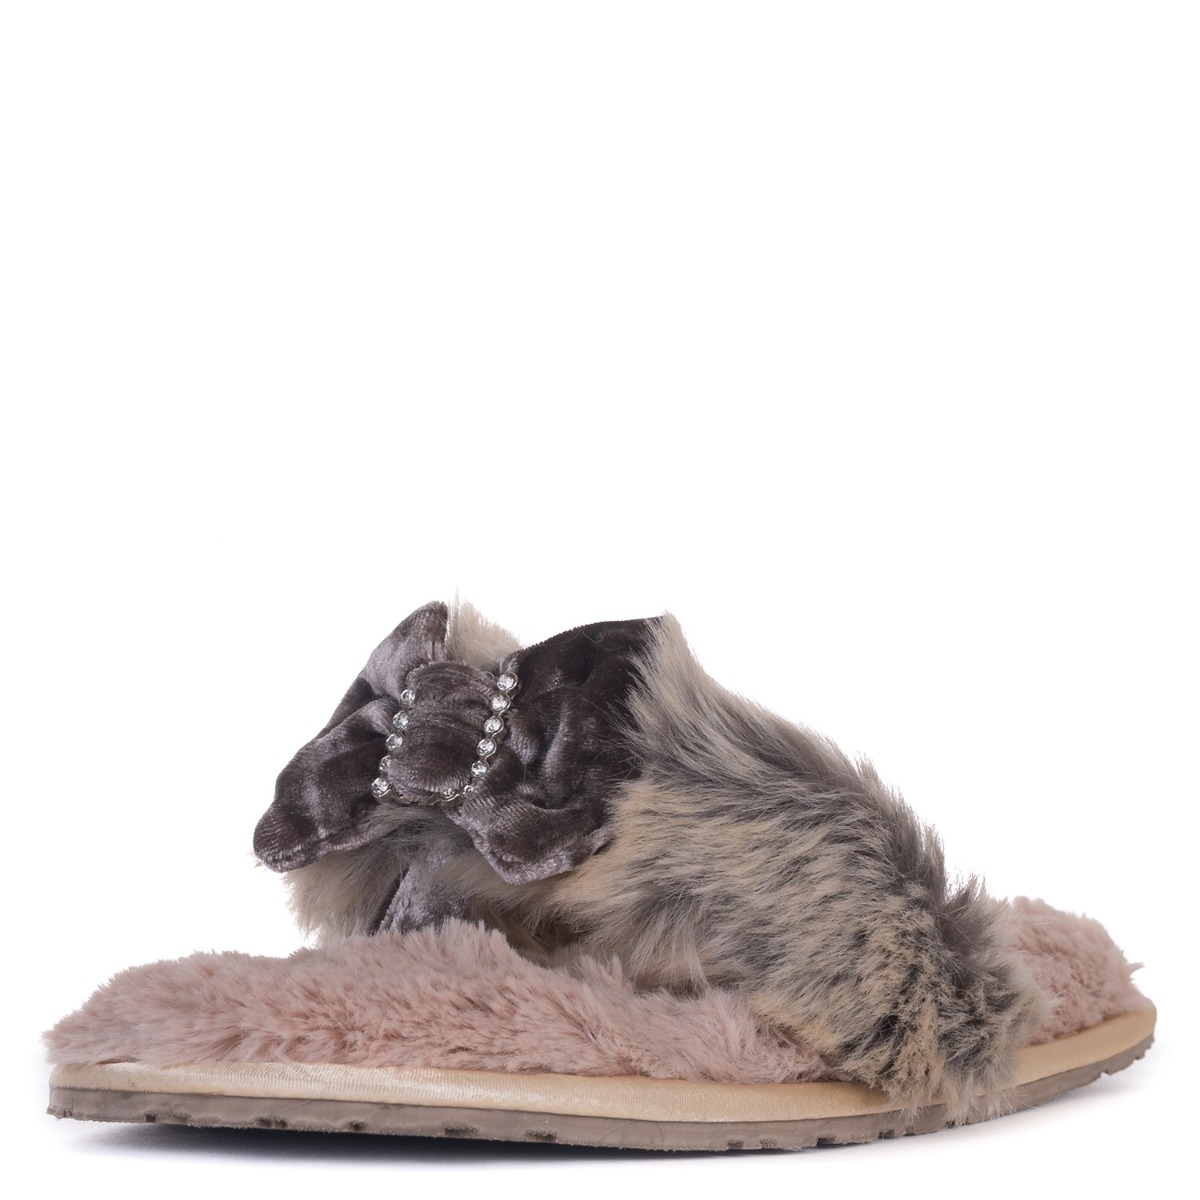 Jacqui Luxury Faux Fur Toe Post Slippers – Small – Gingerbread – Women’s – Bedroom Athletics